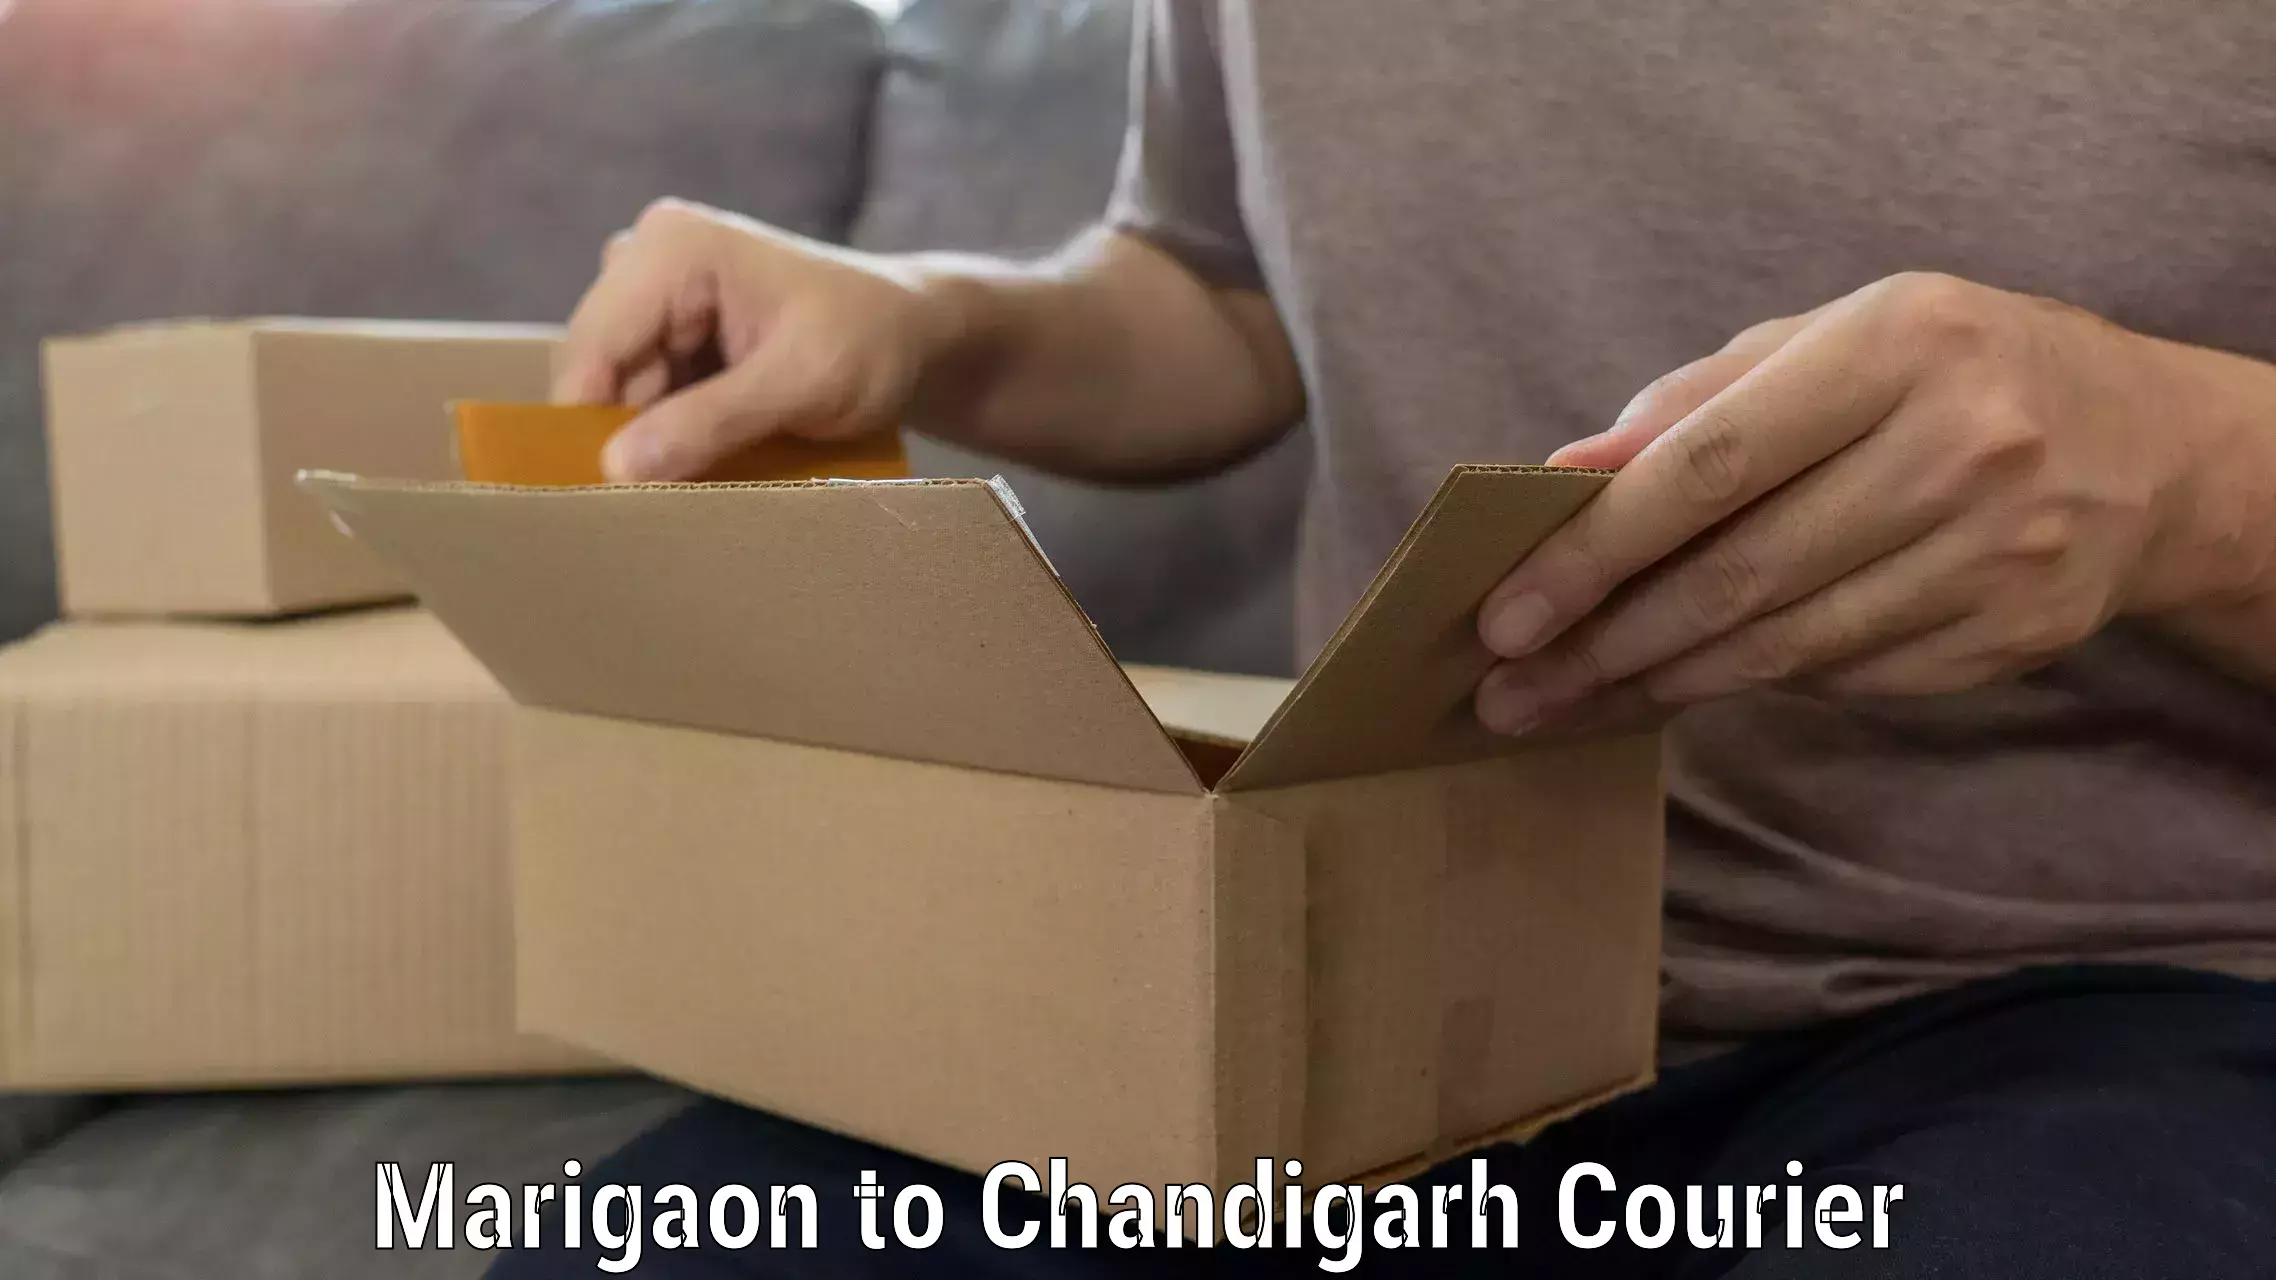 Furniture relocation experts Marigaon to Chandigarh